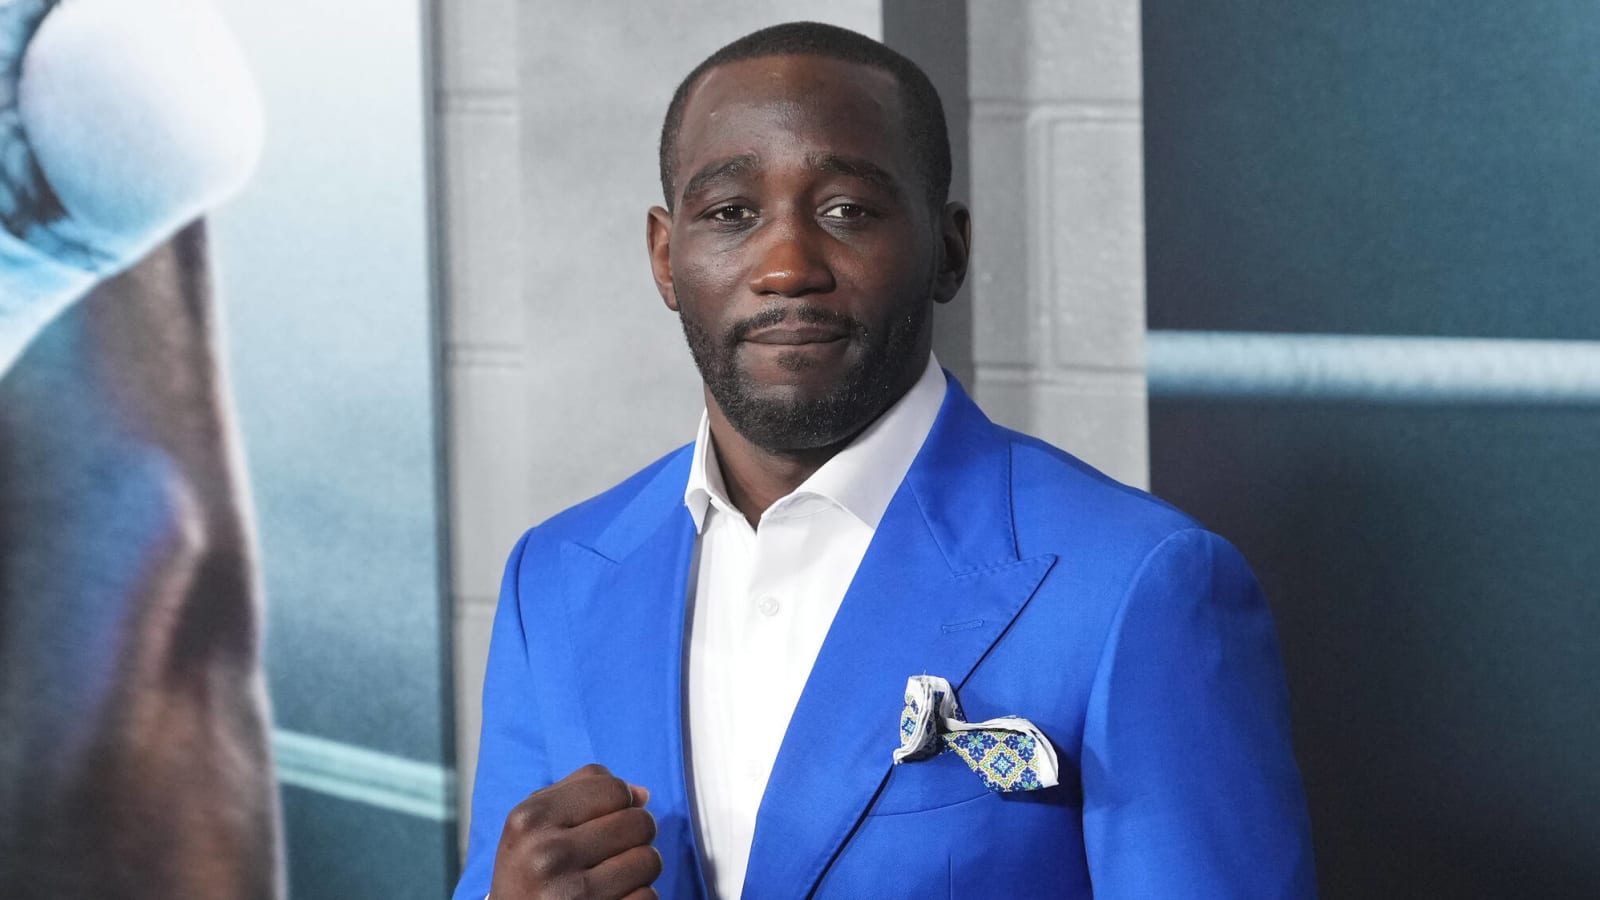 P4P king Terence Crawford in awe of Oleksandr Usyk win against Tyson Fury claims Ukrainian worthy of taking #1 spot